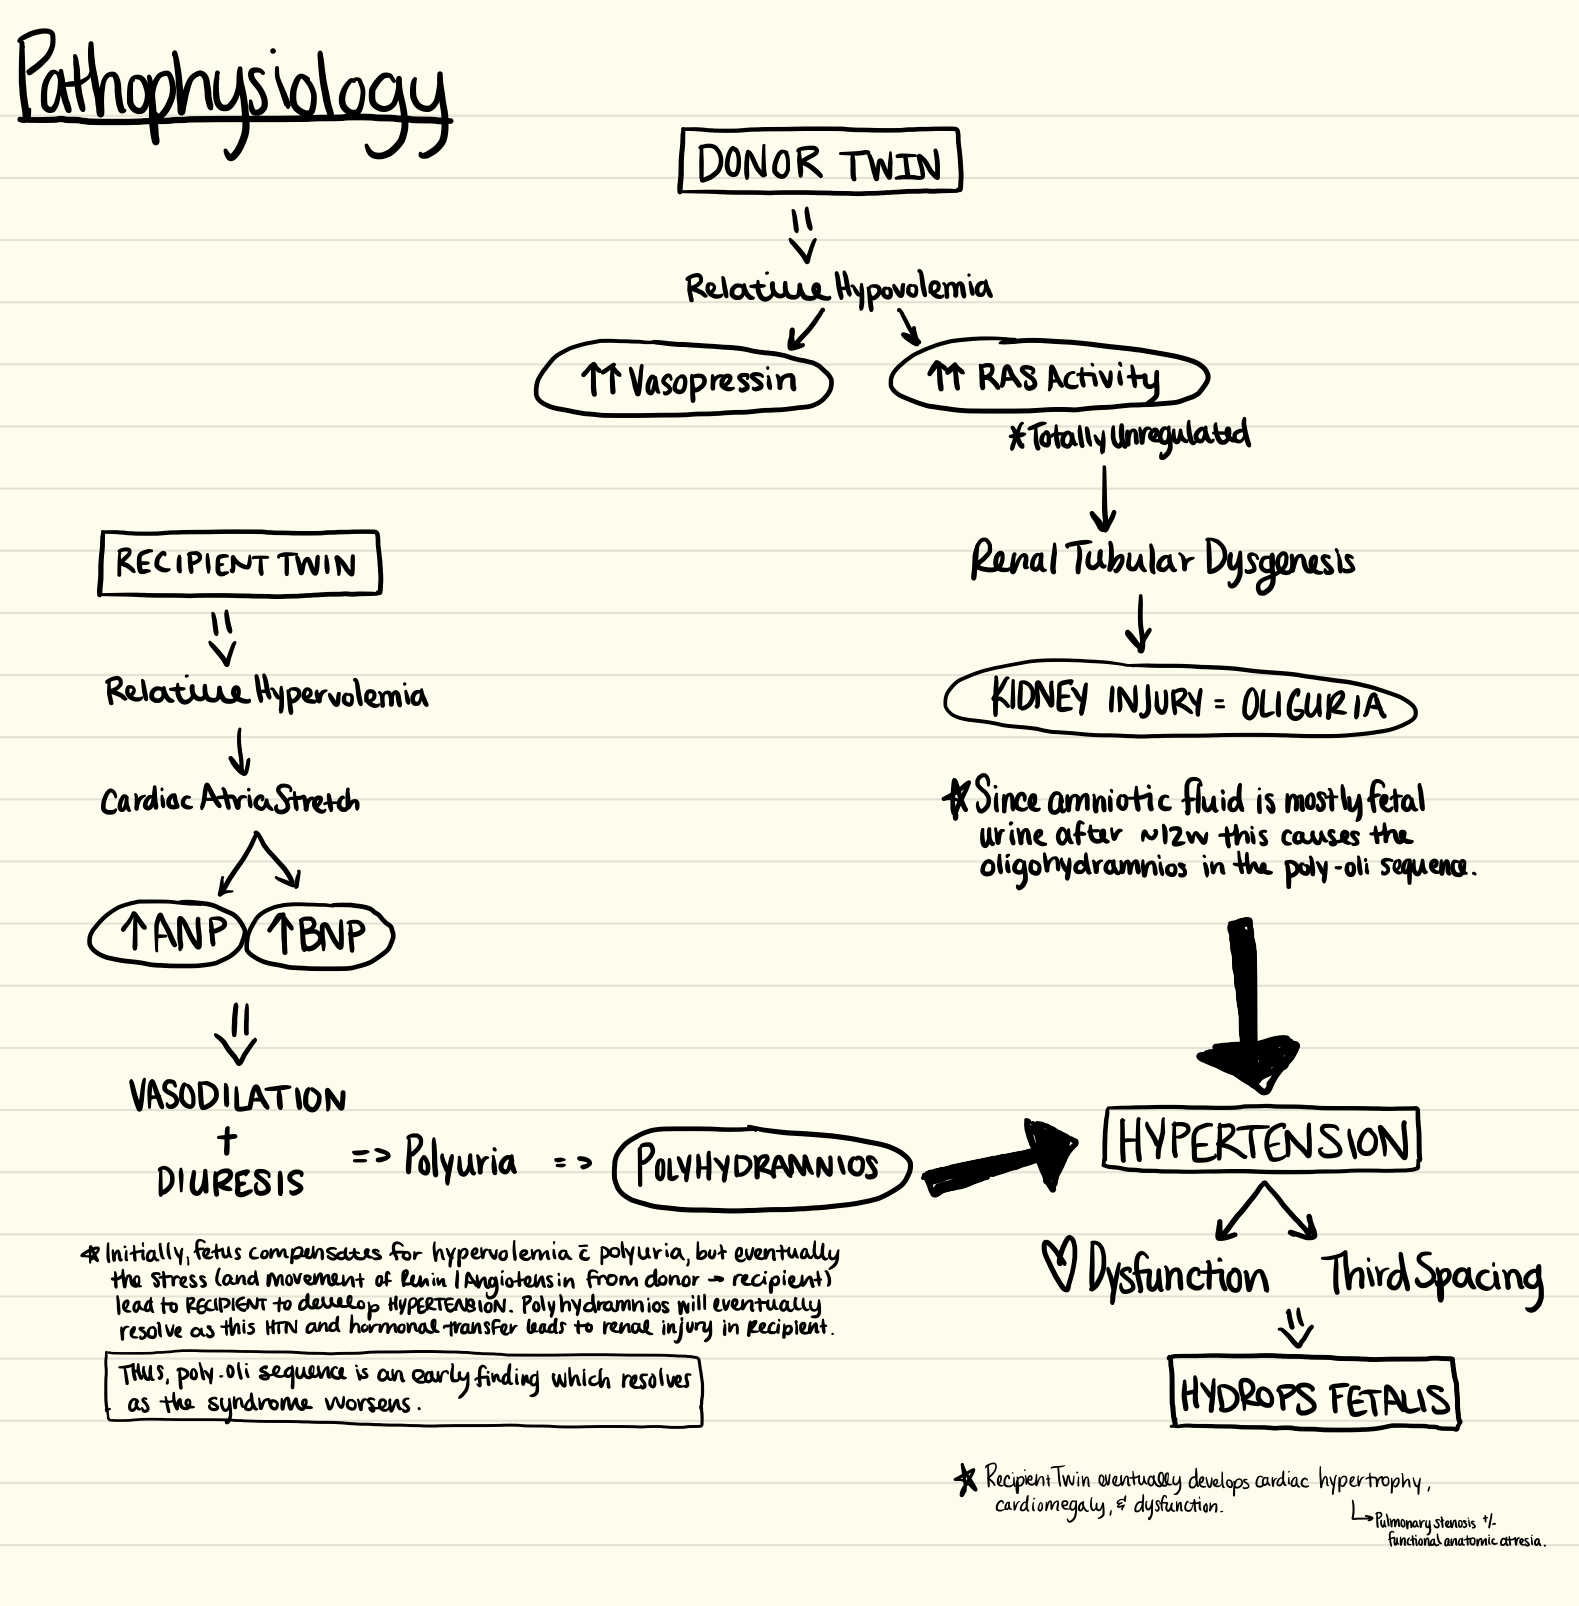 Basic overview of donor and recipient pathophysiology in TTTS.